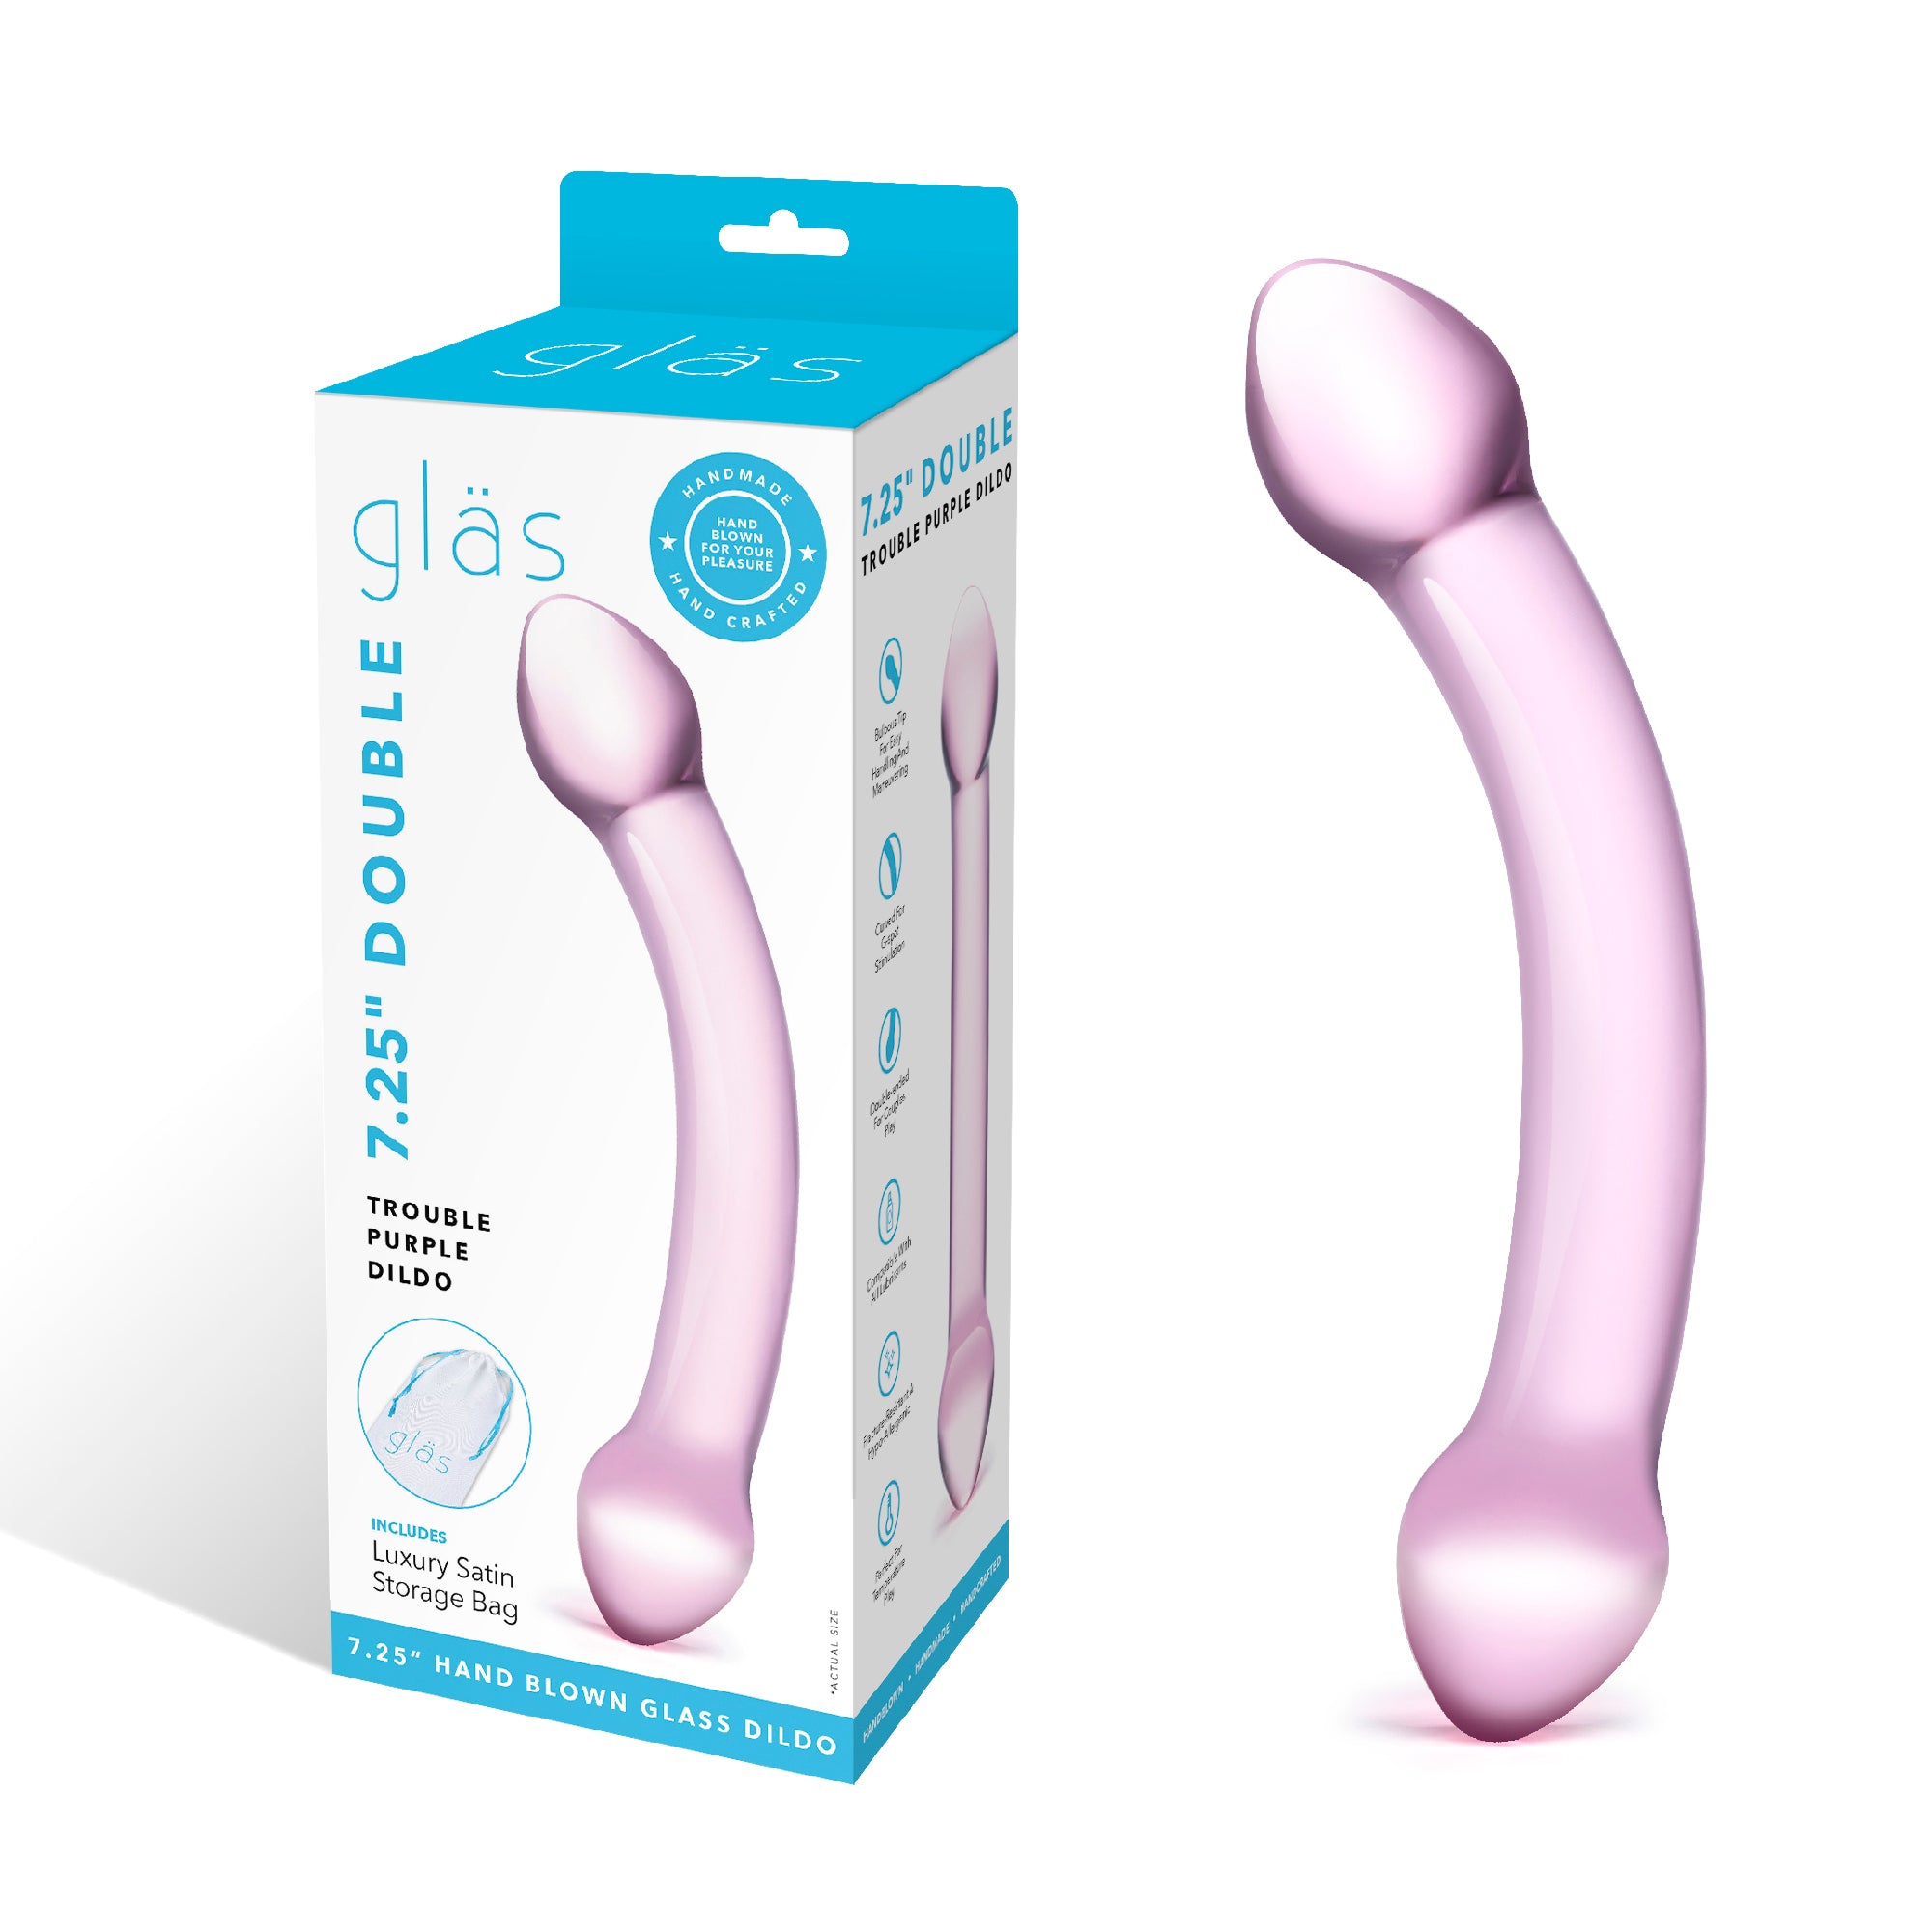 Packaging of the Gläs Double Trouble Purple Glass Dildo